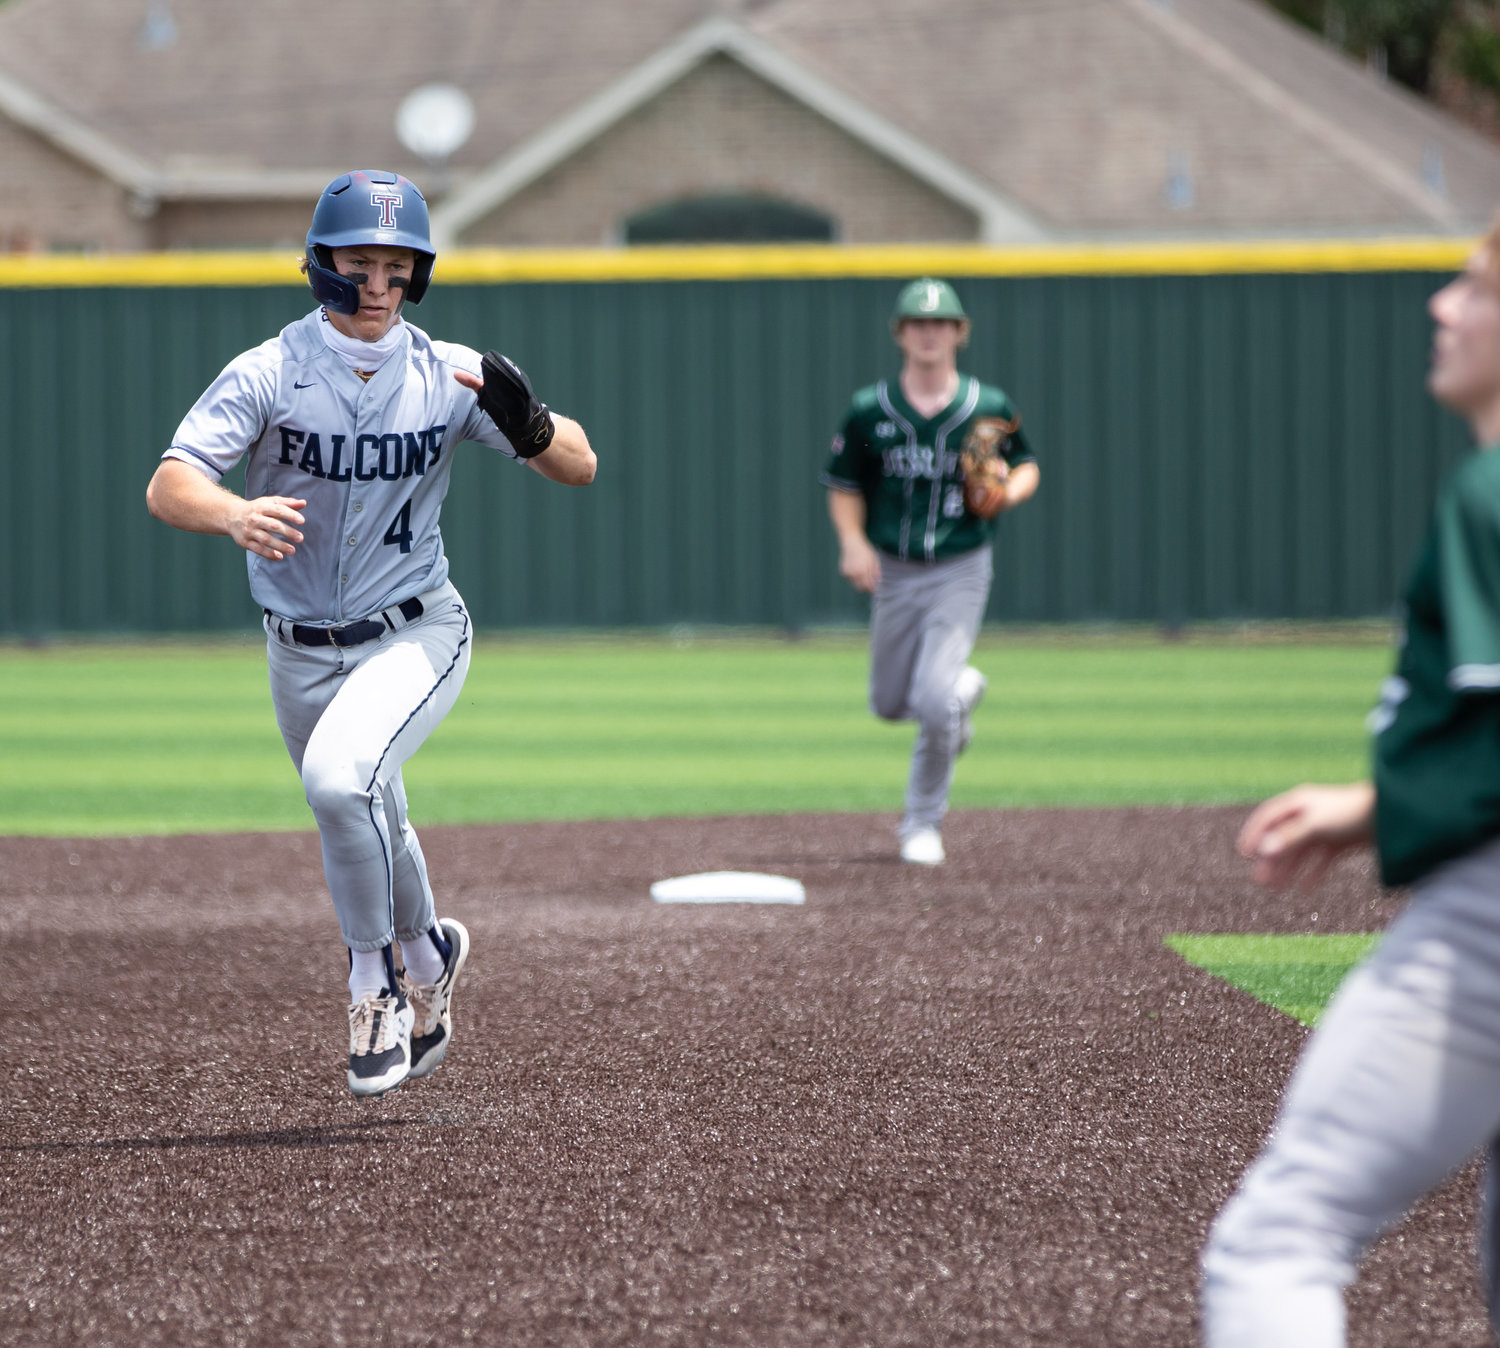 Tompkins senior Will Stark rounds past second base during the first inning of Game 3 of the Falcons’ Region III-6A semifinals against Strake Jesuit on Saturday, May 29, at Cy-Falls High. Stark eventually scored on an RBI groundout by Jace Laviolette.